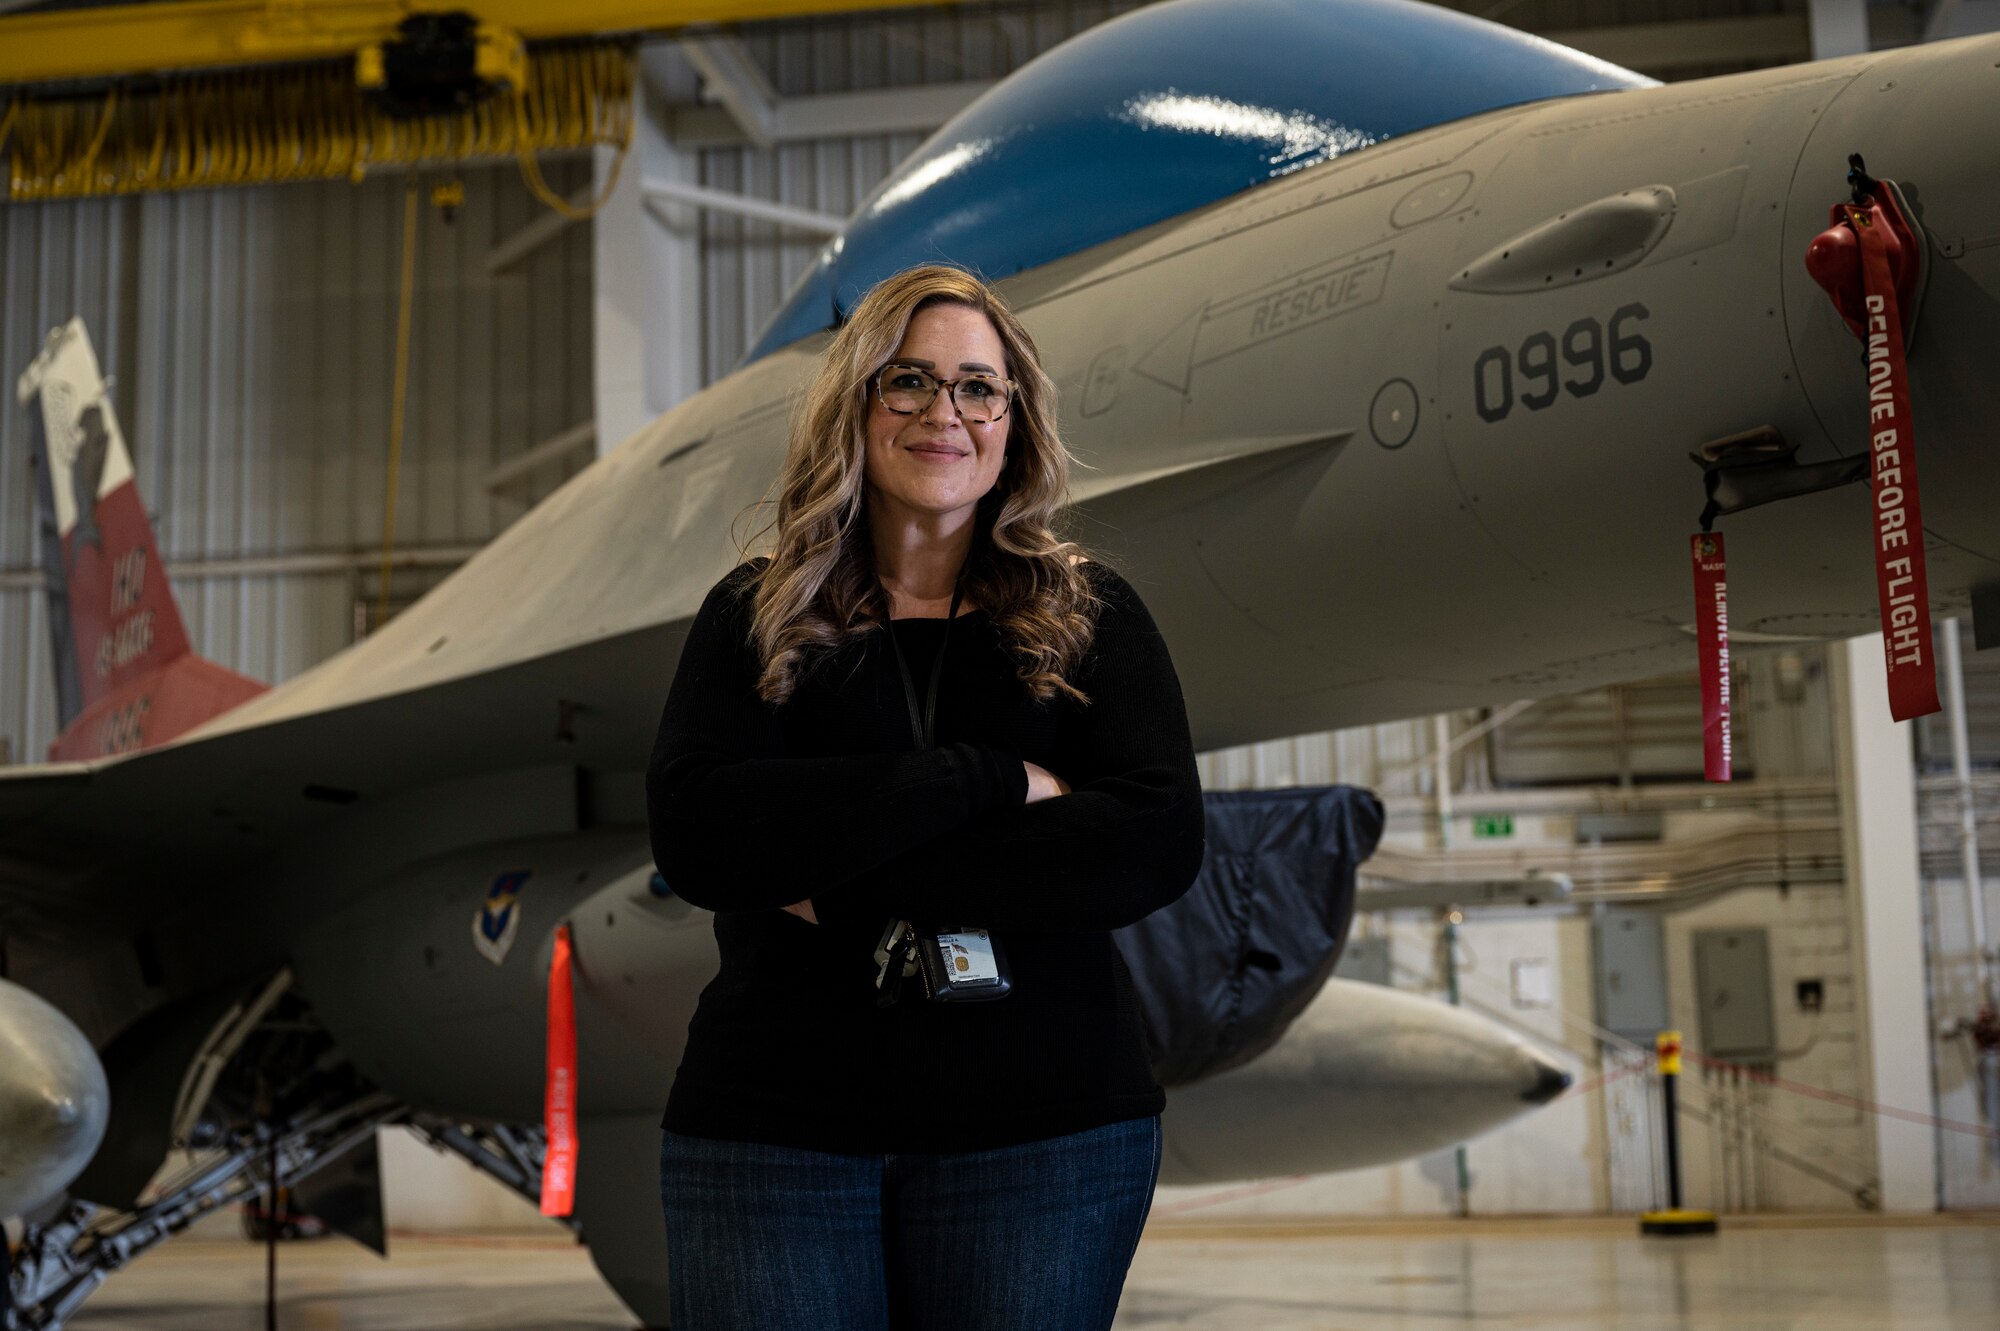 Michelle Harrell, 49th Maintenance Group unit program coordinator, poses for a photo in front of an F-16 Viper static display at Holloman Air Force Base, New Mexico, October 27, 2022. Harrell’s occupation at the 49th MXG is to provide assistance to Airmen dealing with in-processing, extensions, reenlistments and retirements. (U.S. Air Force photo by Airman 1st Class Isaiah Pedrazzini)